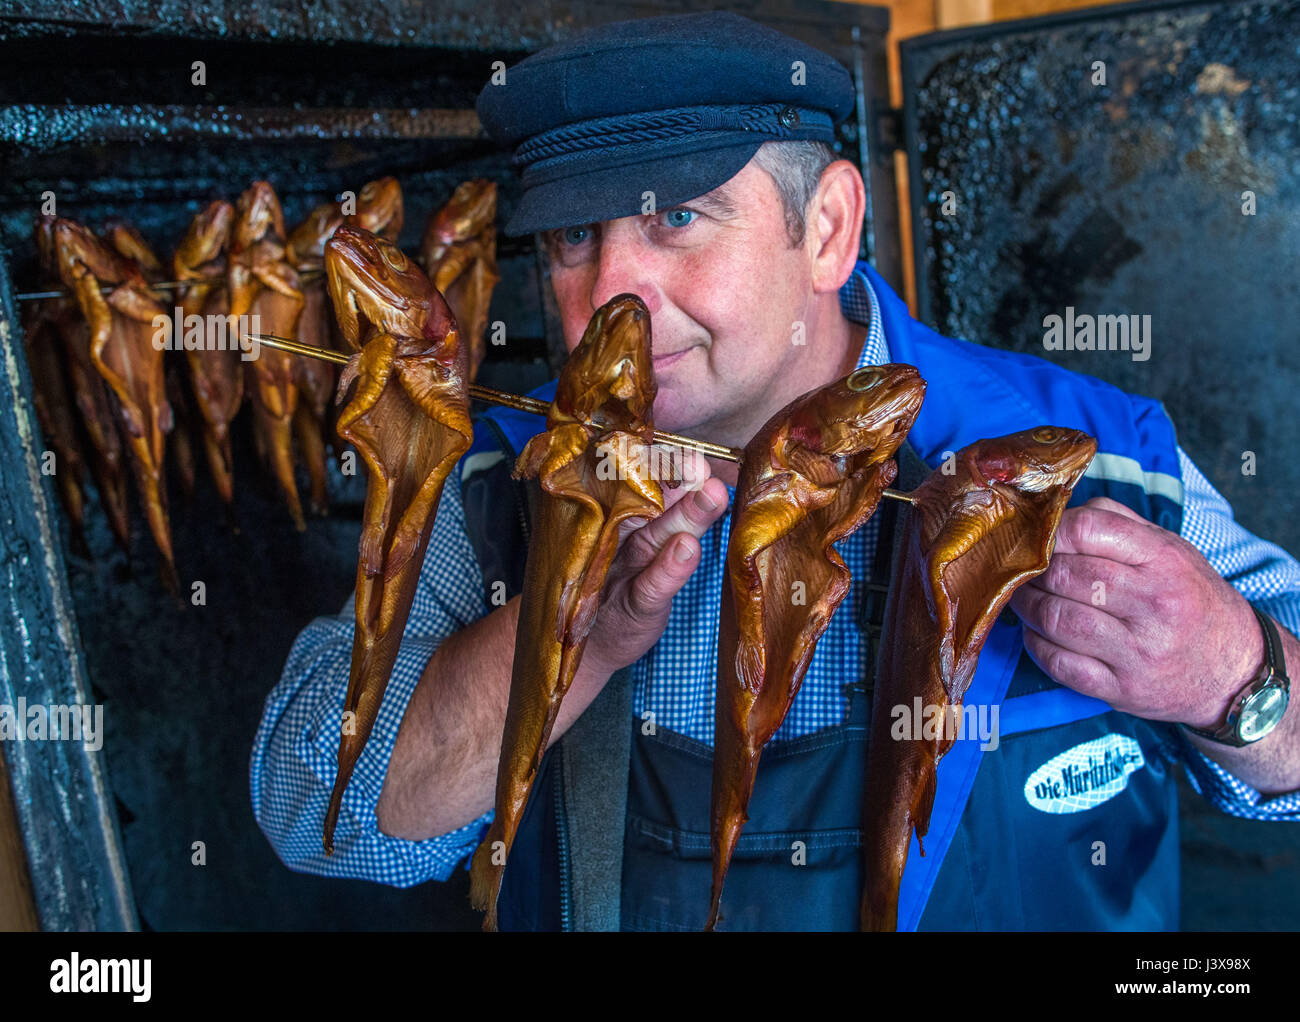 Vipperow, Germany. 4th May, 2017. Inland fisher Guenter Zillmann retrieves freshly smoked char from the oven at the fish farm at the Mueritz in Vipperow, Germany, 4 May 2017. The fish farm is part of the largest inland fishery in Germany: Fishery Mueitz-Plau GmbH. Besides the tradition fishery and the breeding of fish, modern aqua culture is also part of the business. The fishery, founded in 1990 from the former production cooperative (founded 1952) holds more than 30.000 hectars of water. Photo: Jens Büttner/dpa-Zentralbild/dpa/Alamy Live News Stock Photo